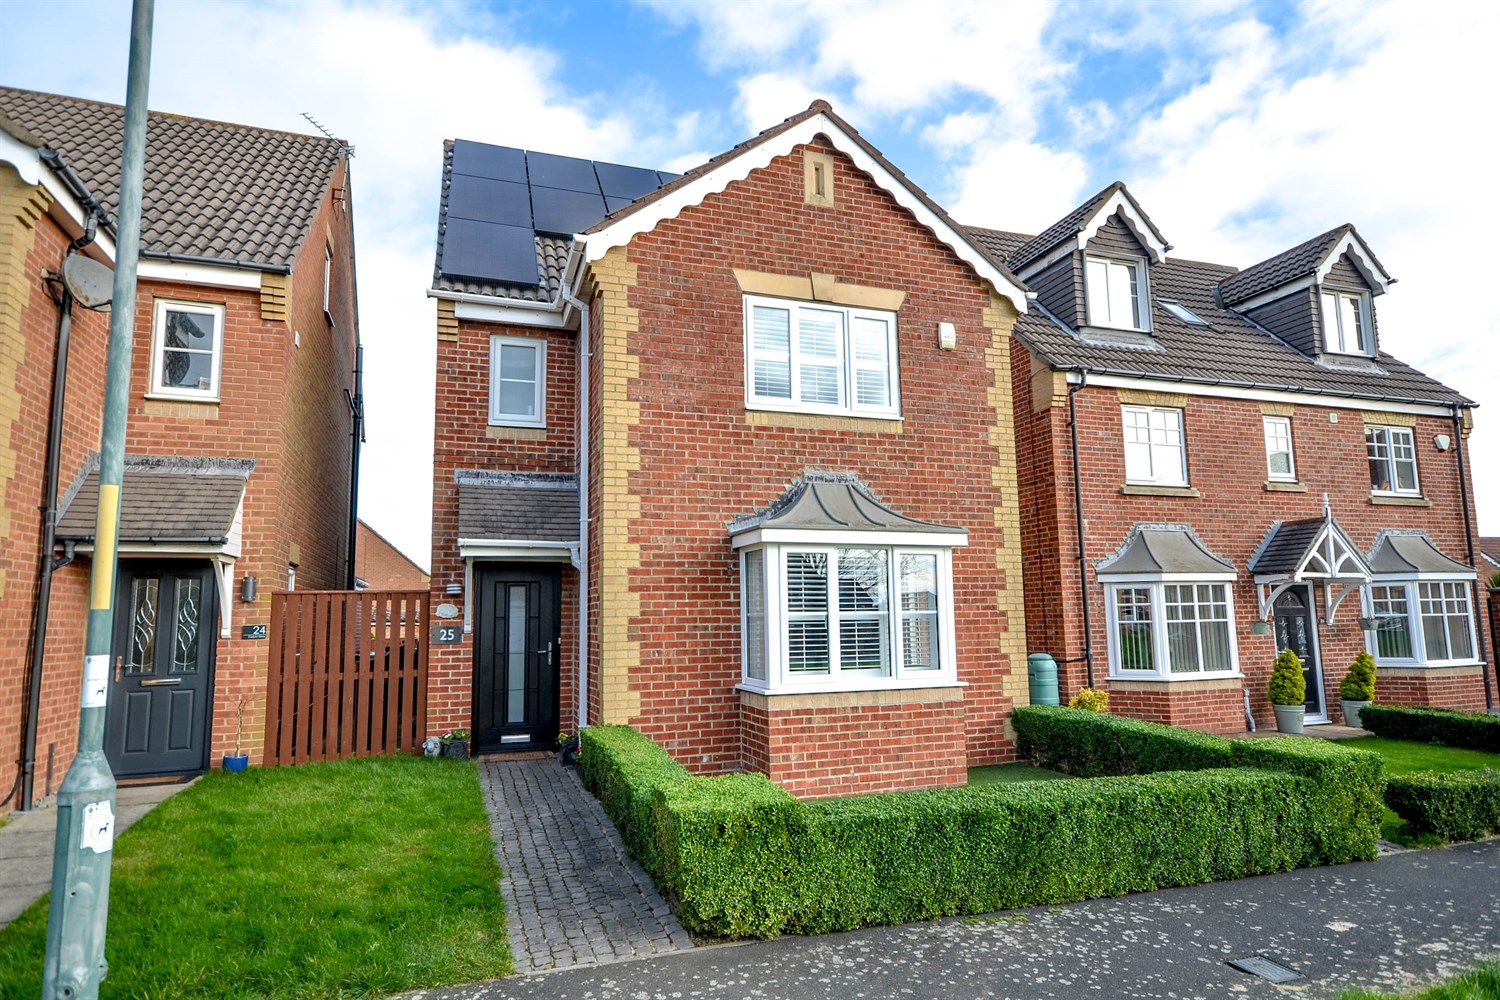 4 bed detached house for sale in Callum Drive, South Shields  - Property Image 1